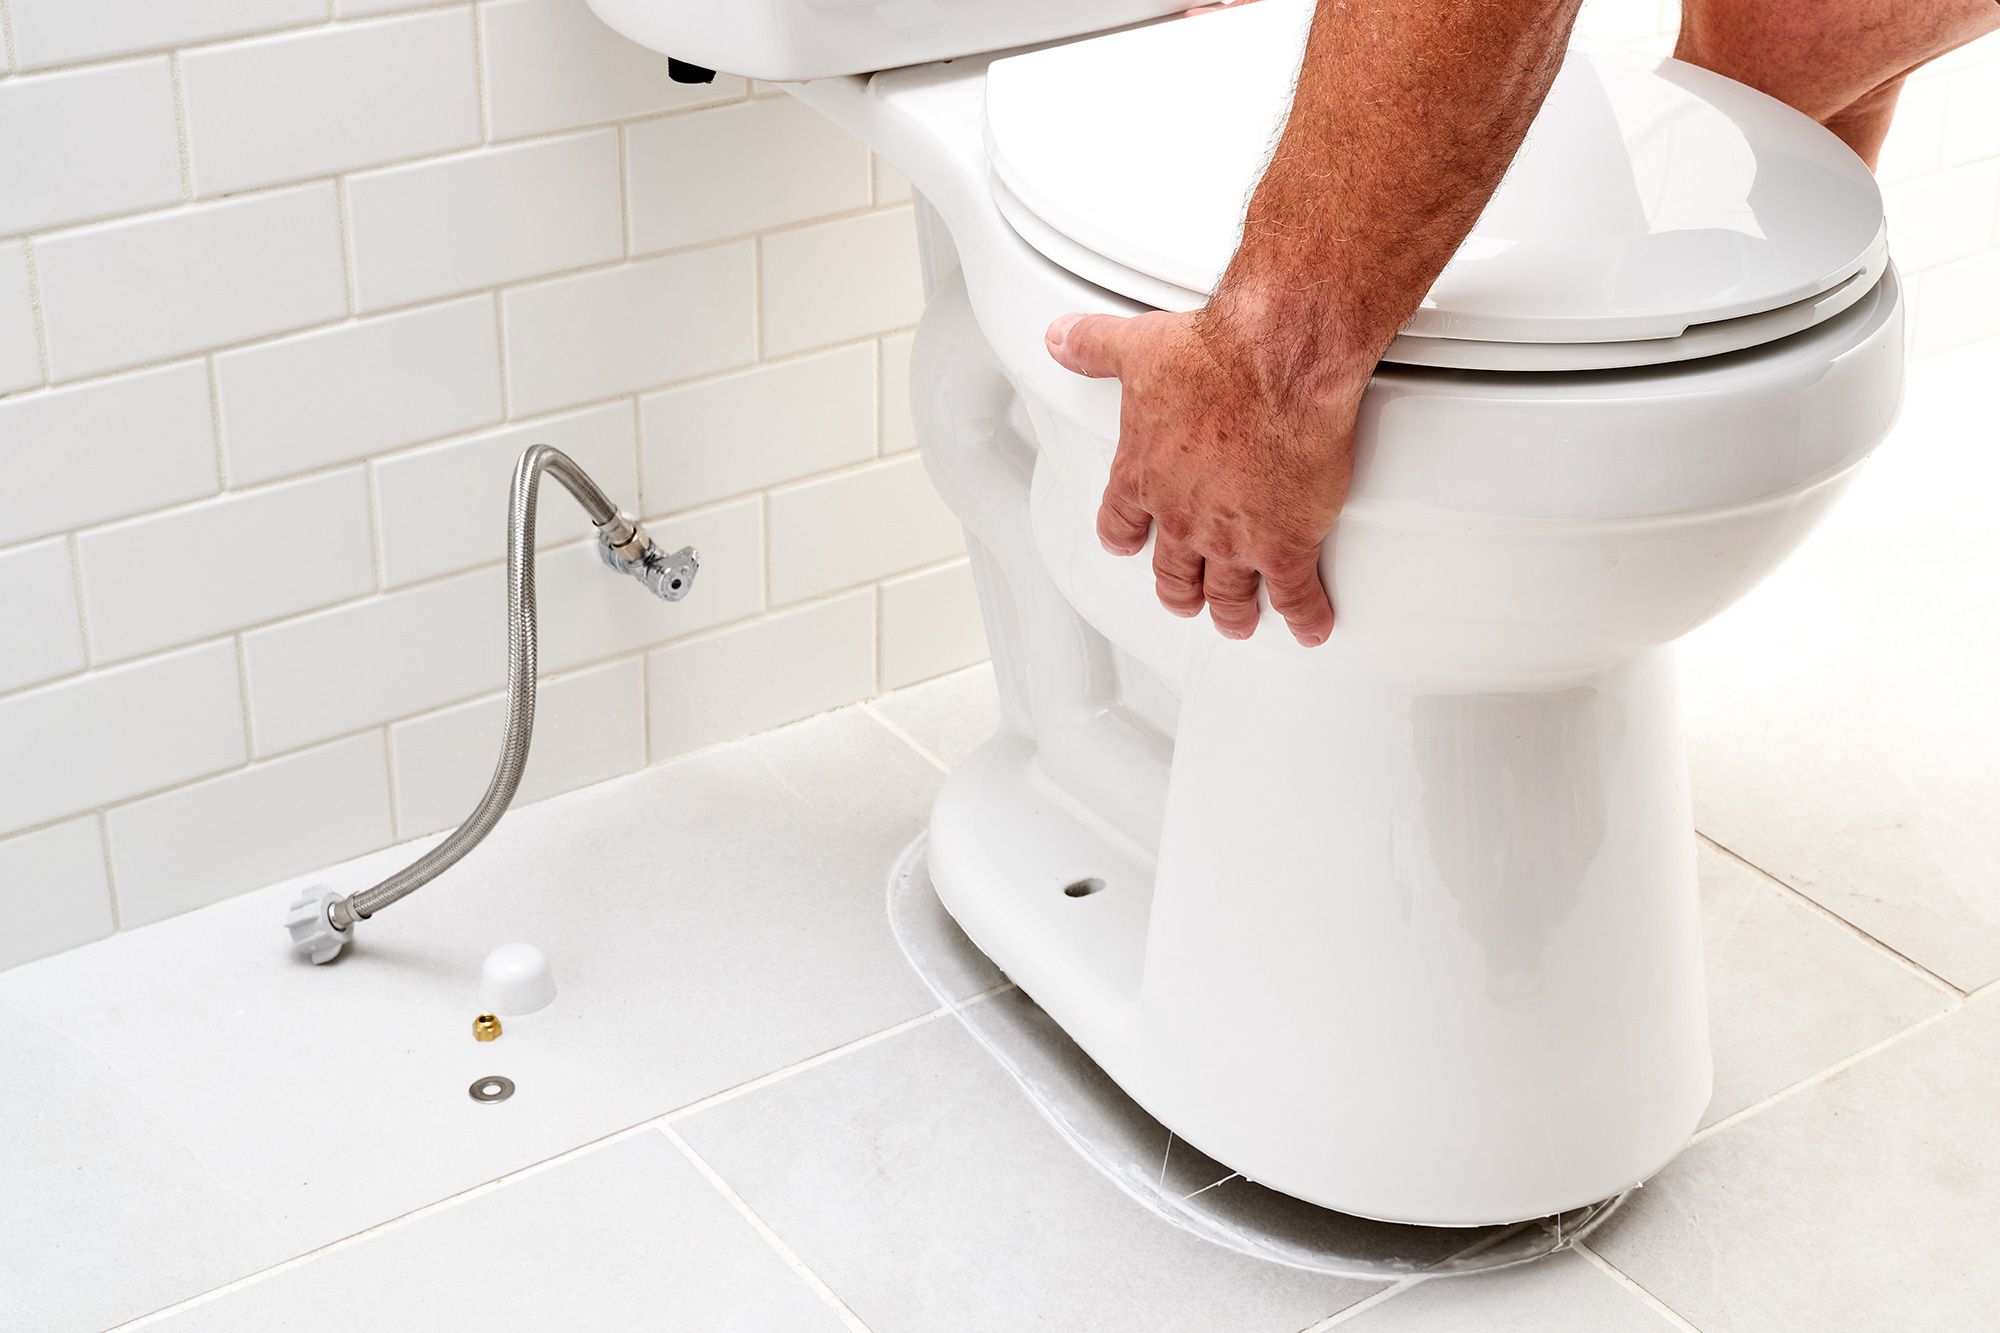 How To Remove A Toilet Bowl